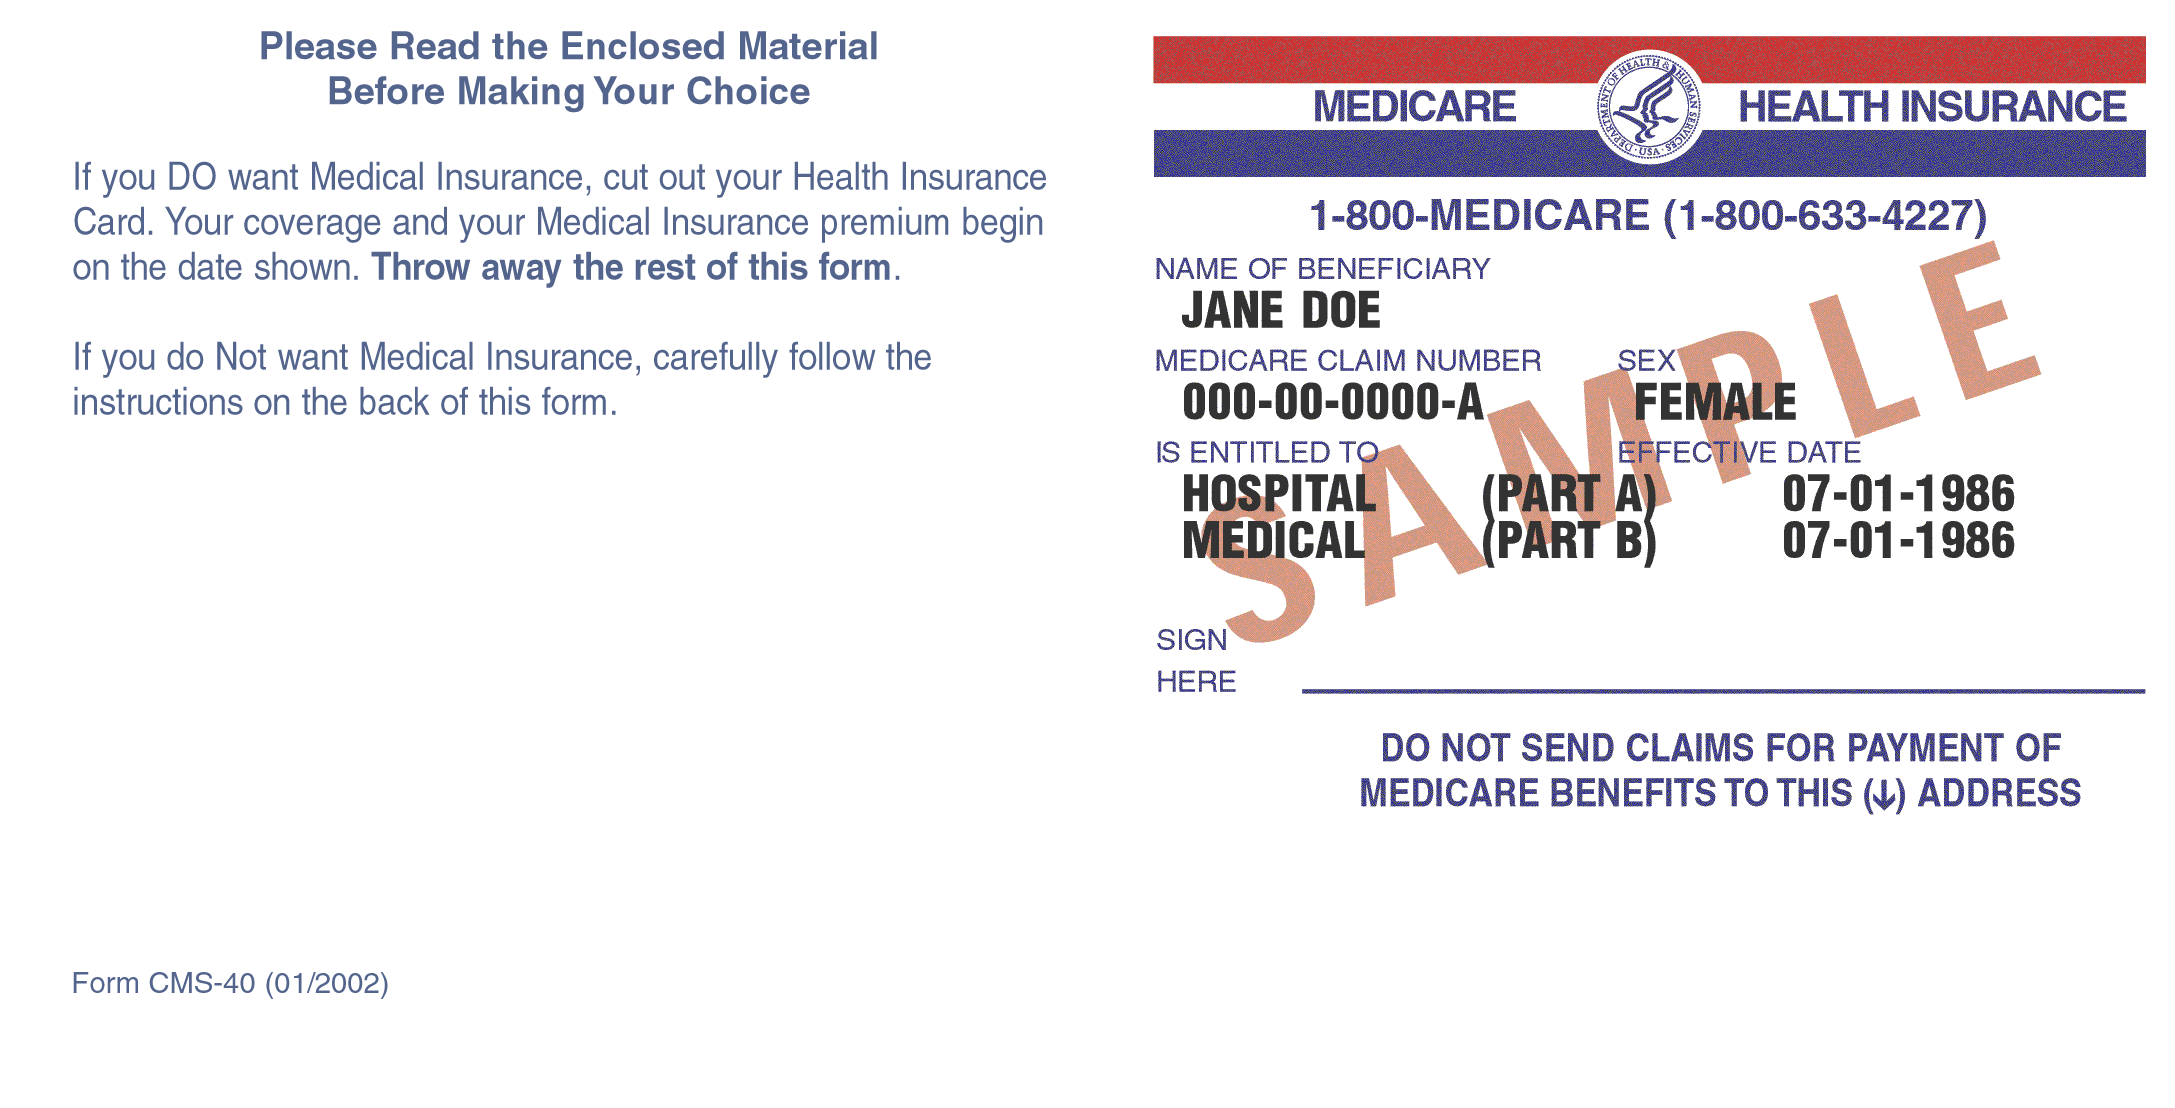 Medicare Card Front View